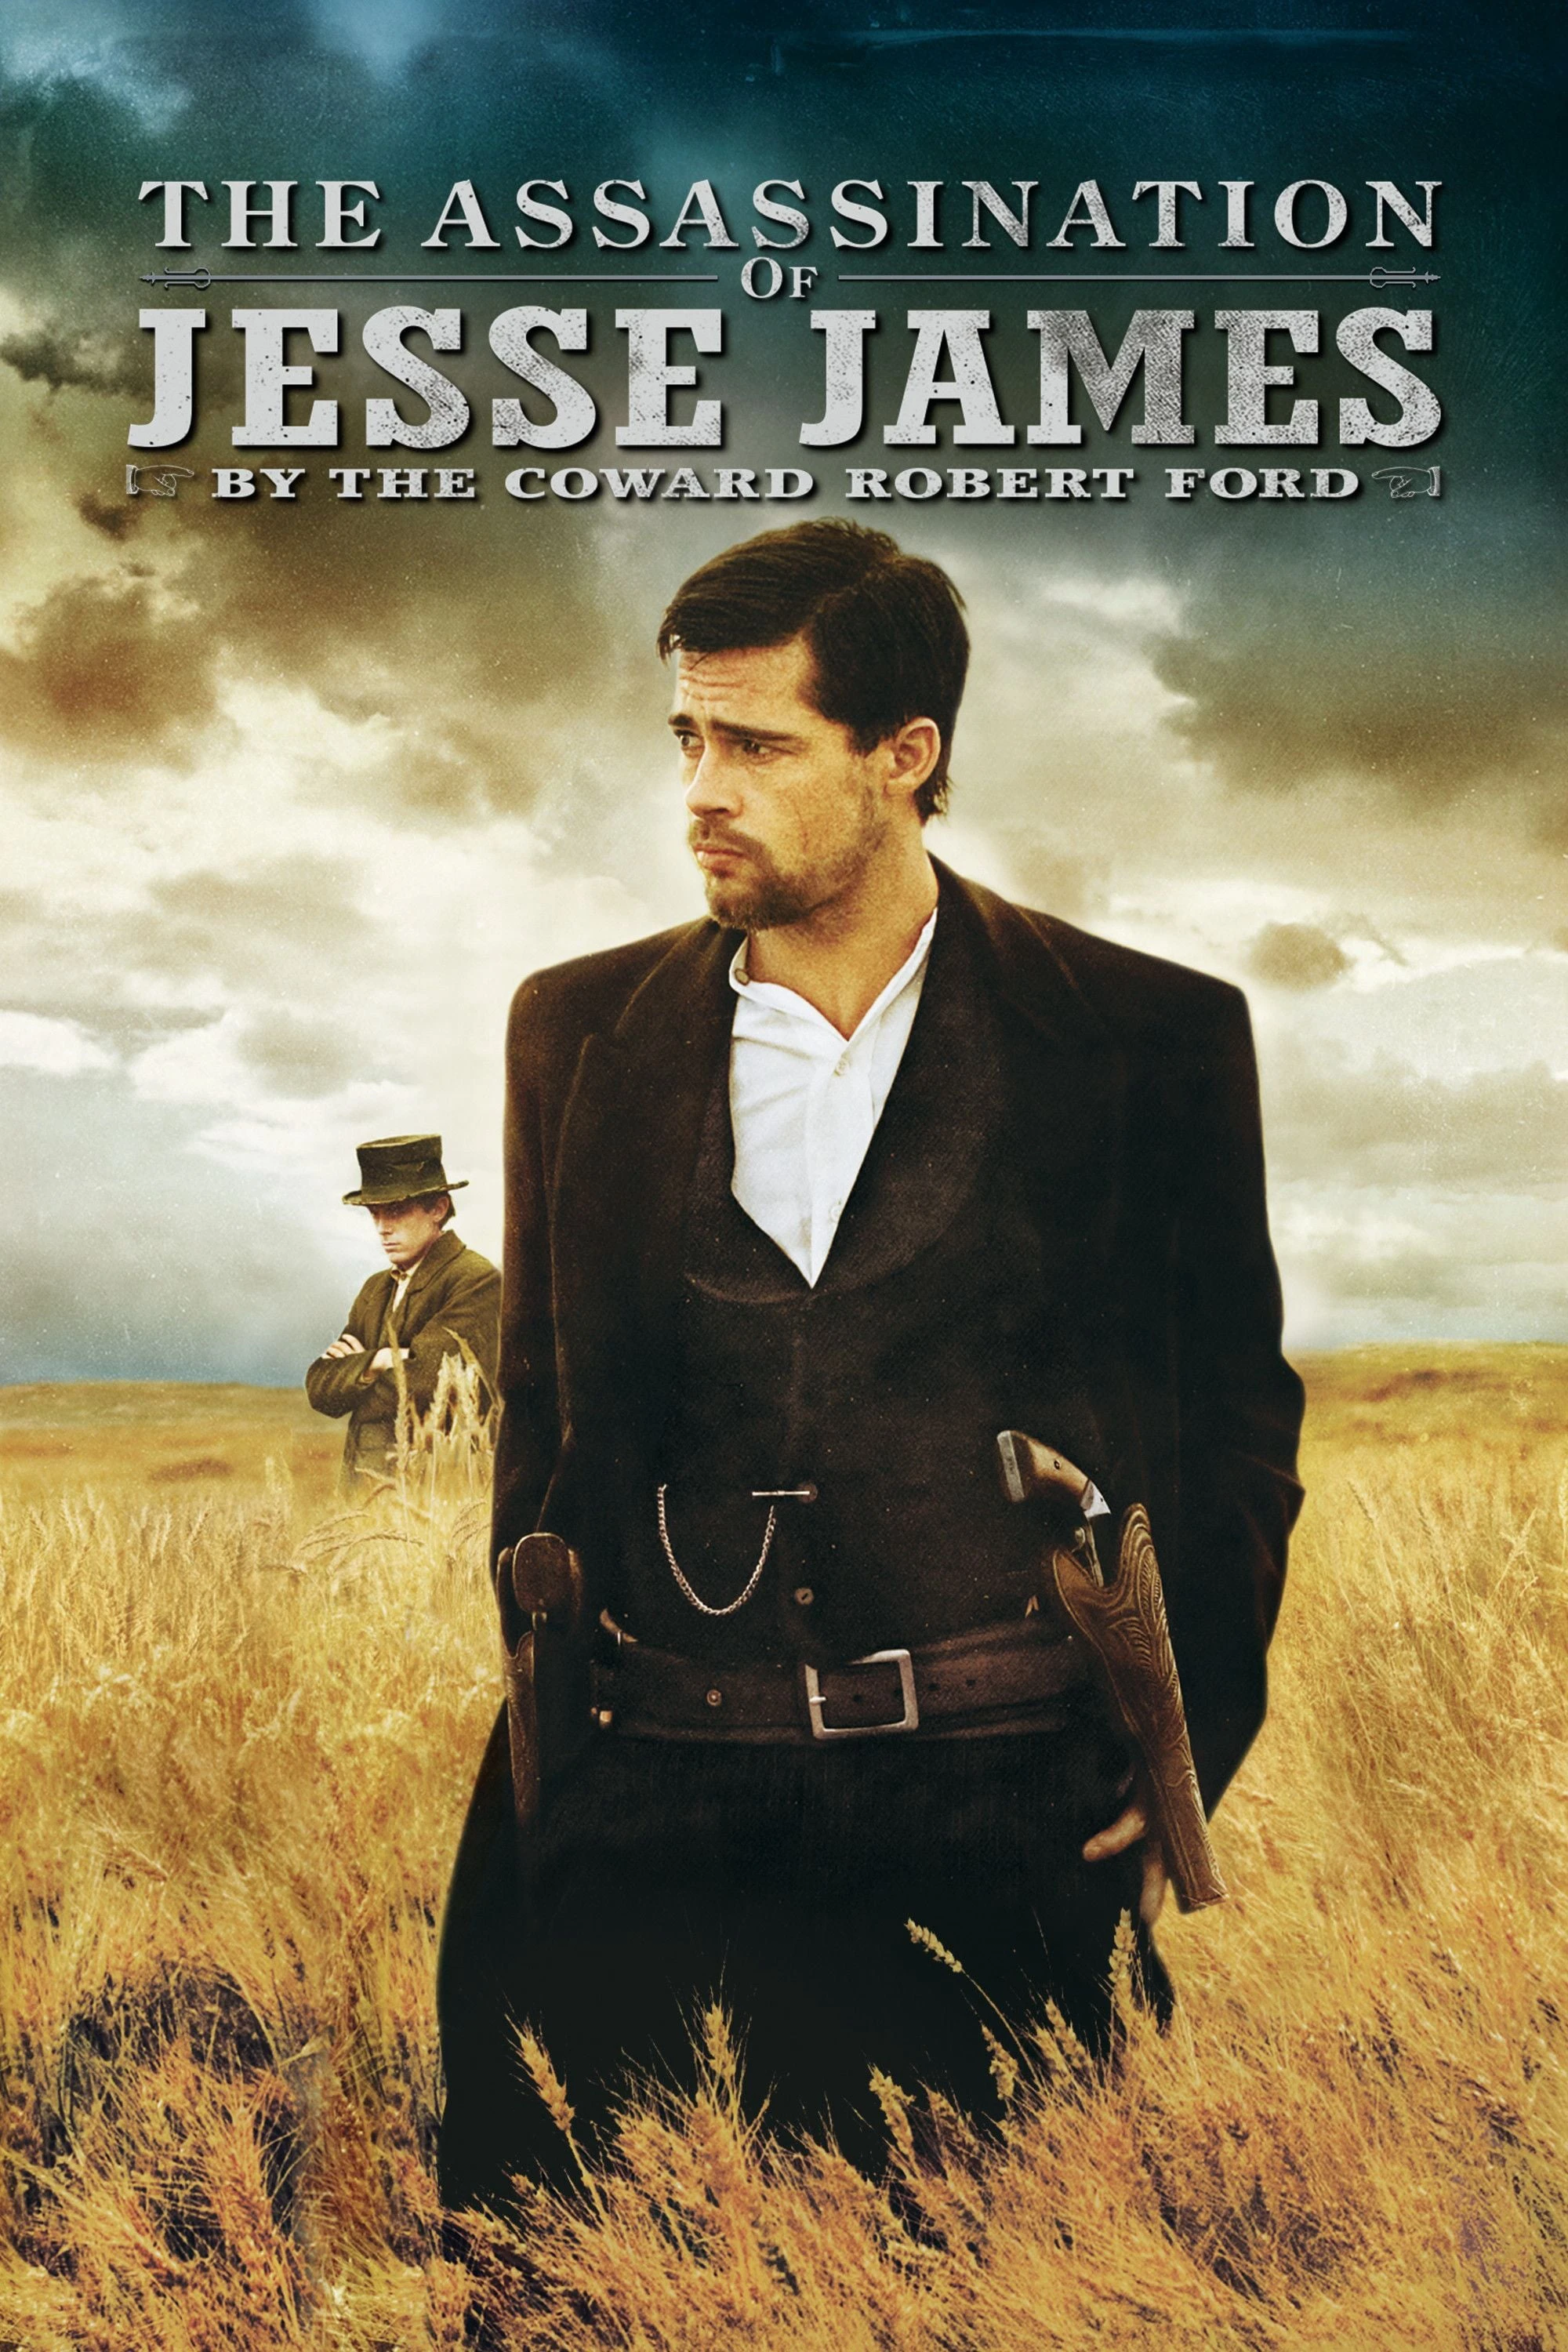 The Assassination of Jesse James by the Coward Robert Ford | The Assassination of Jesse James by the Coward Robert Ford (2007)